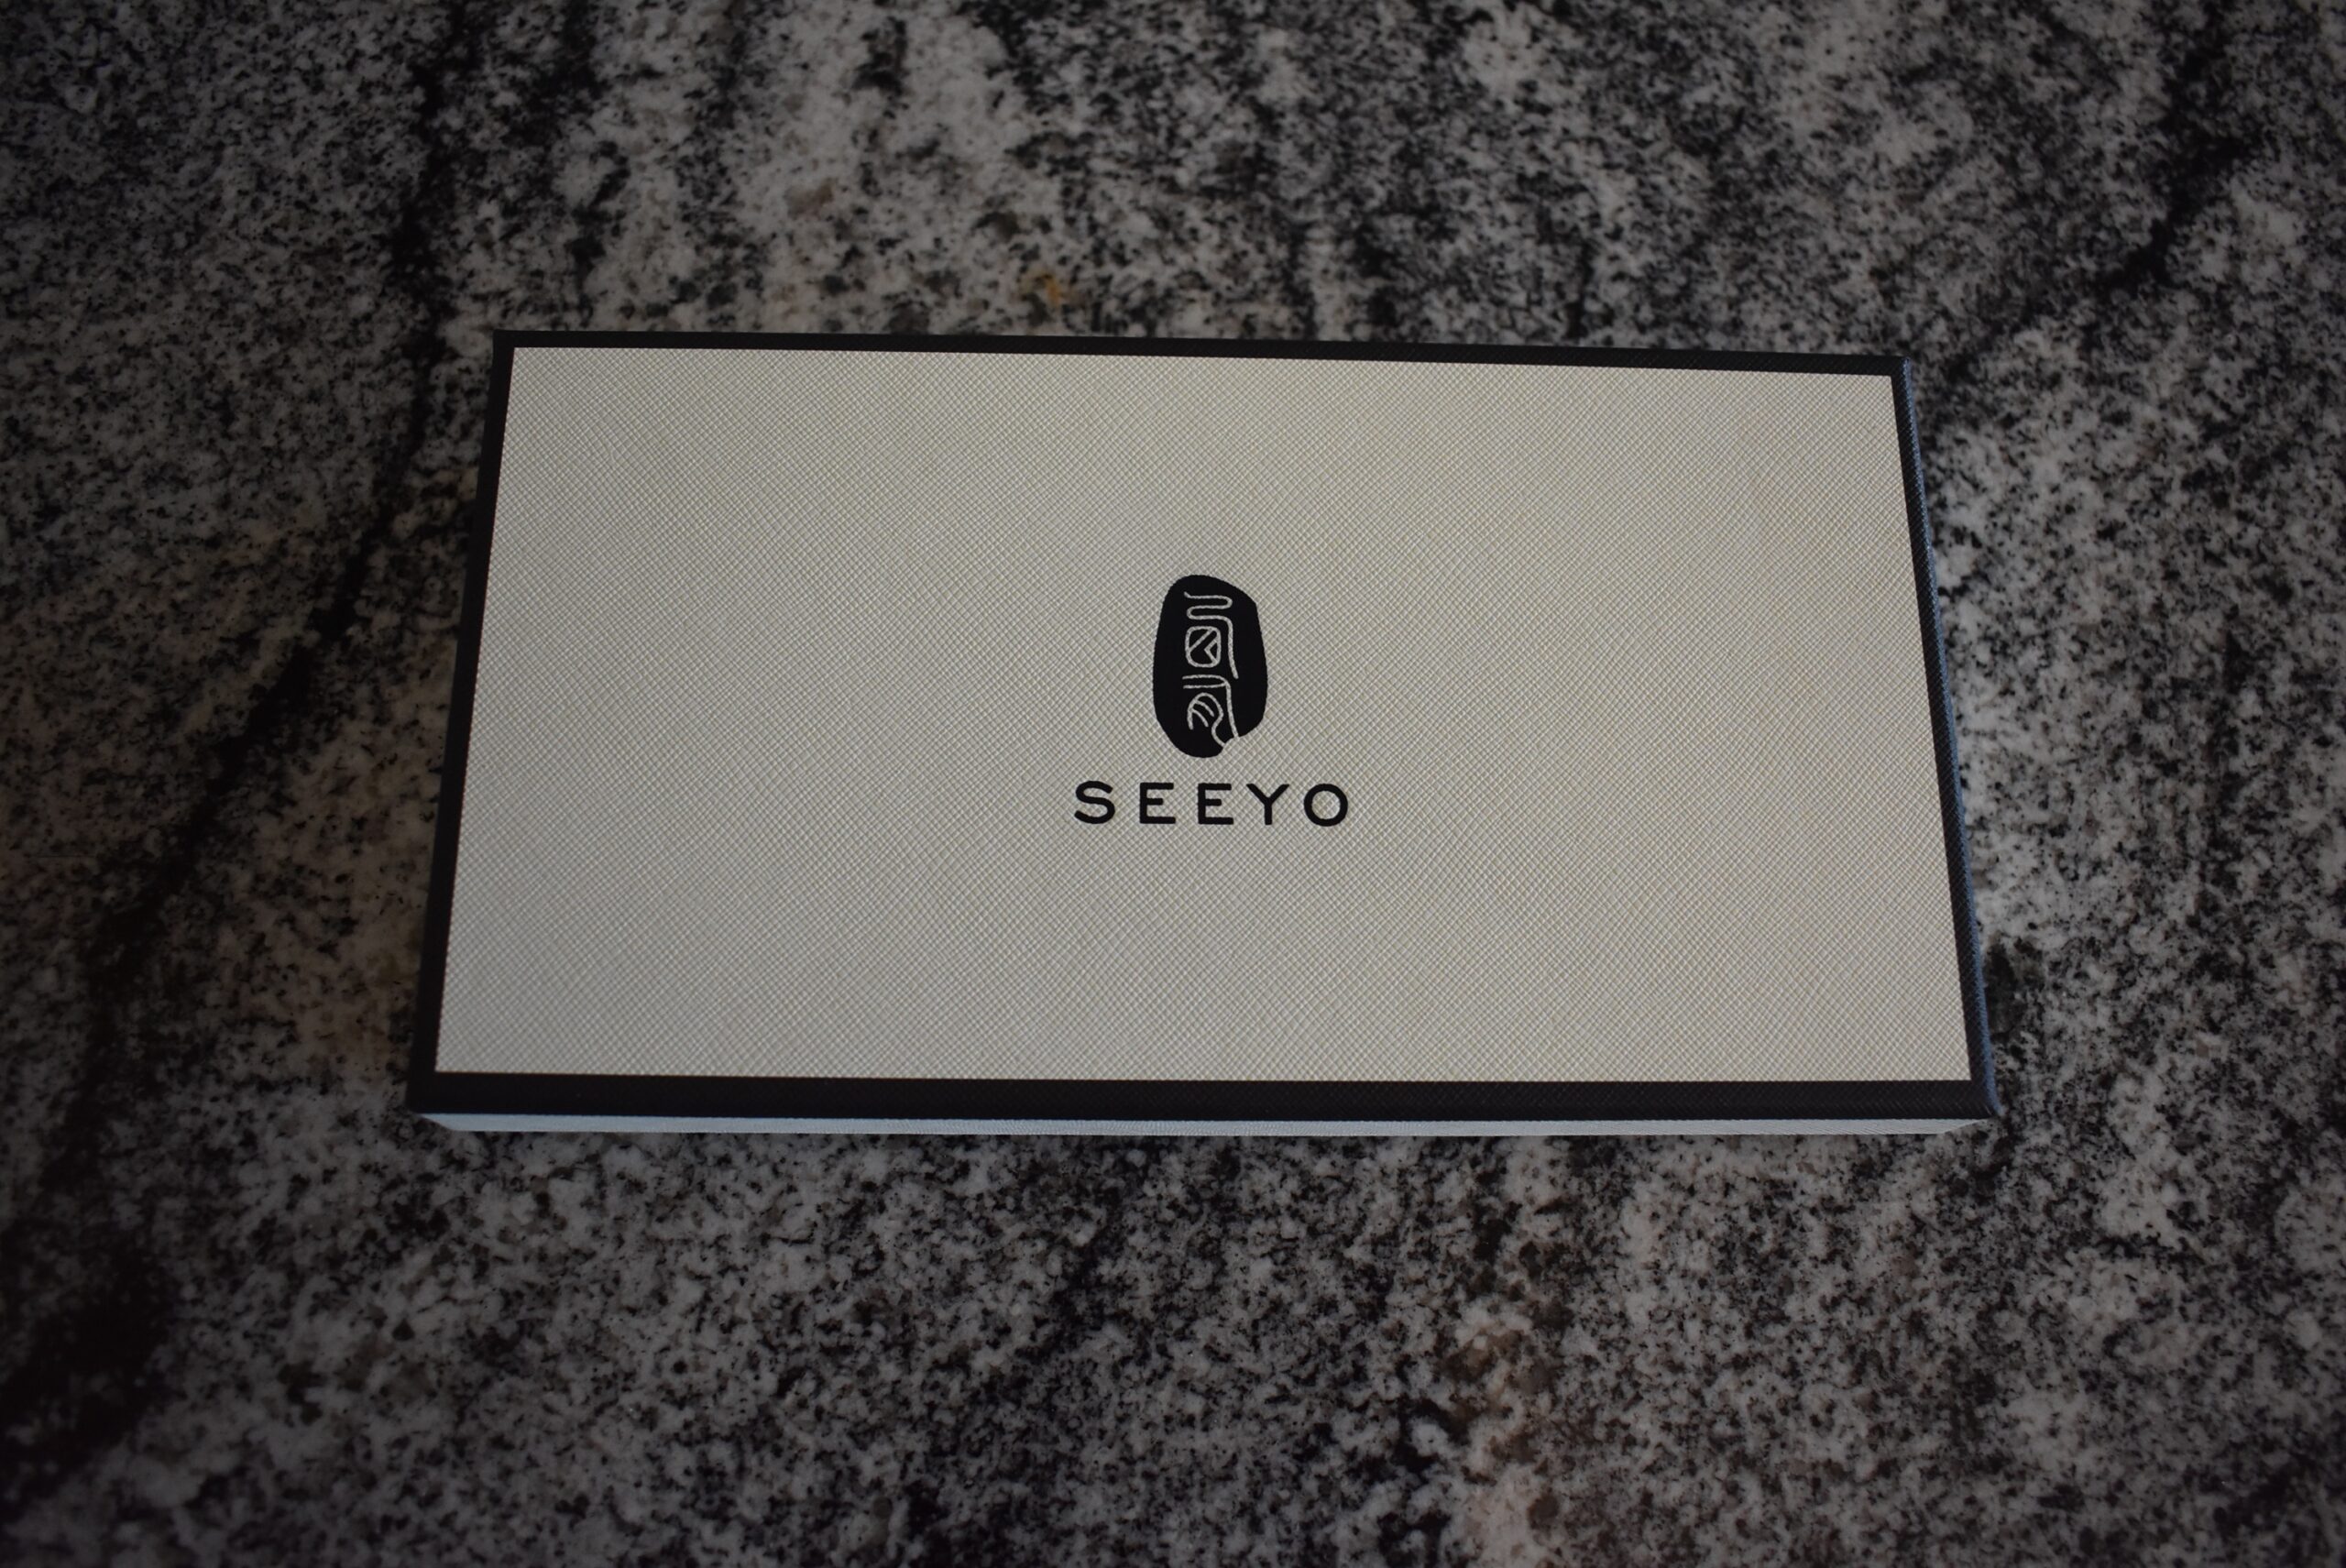 Seeyo straight razor (one of the best) in its box on a granite counter